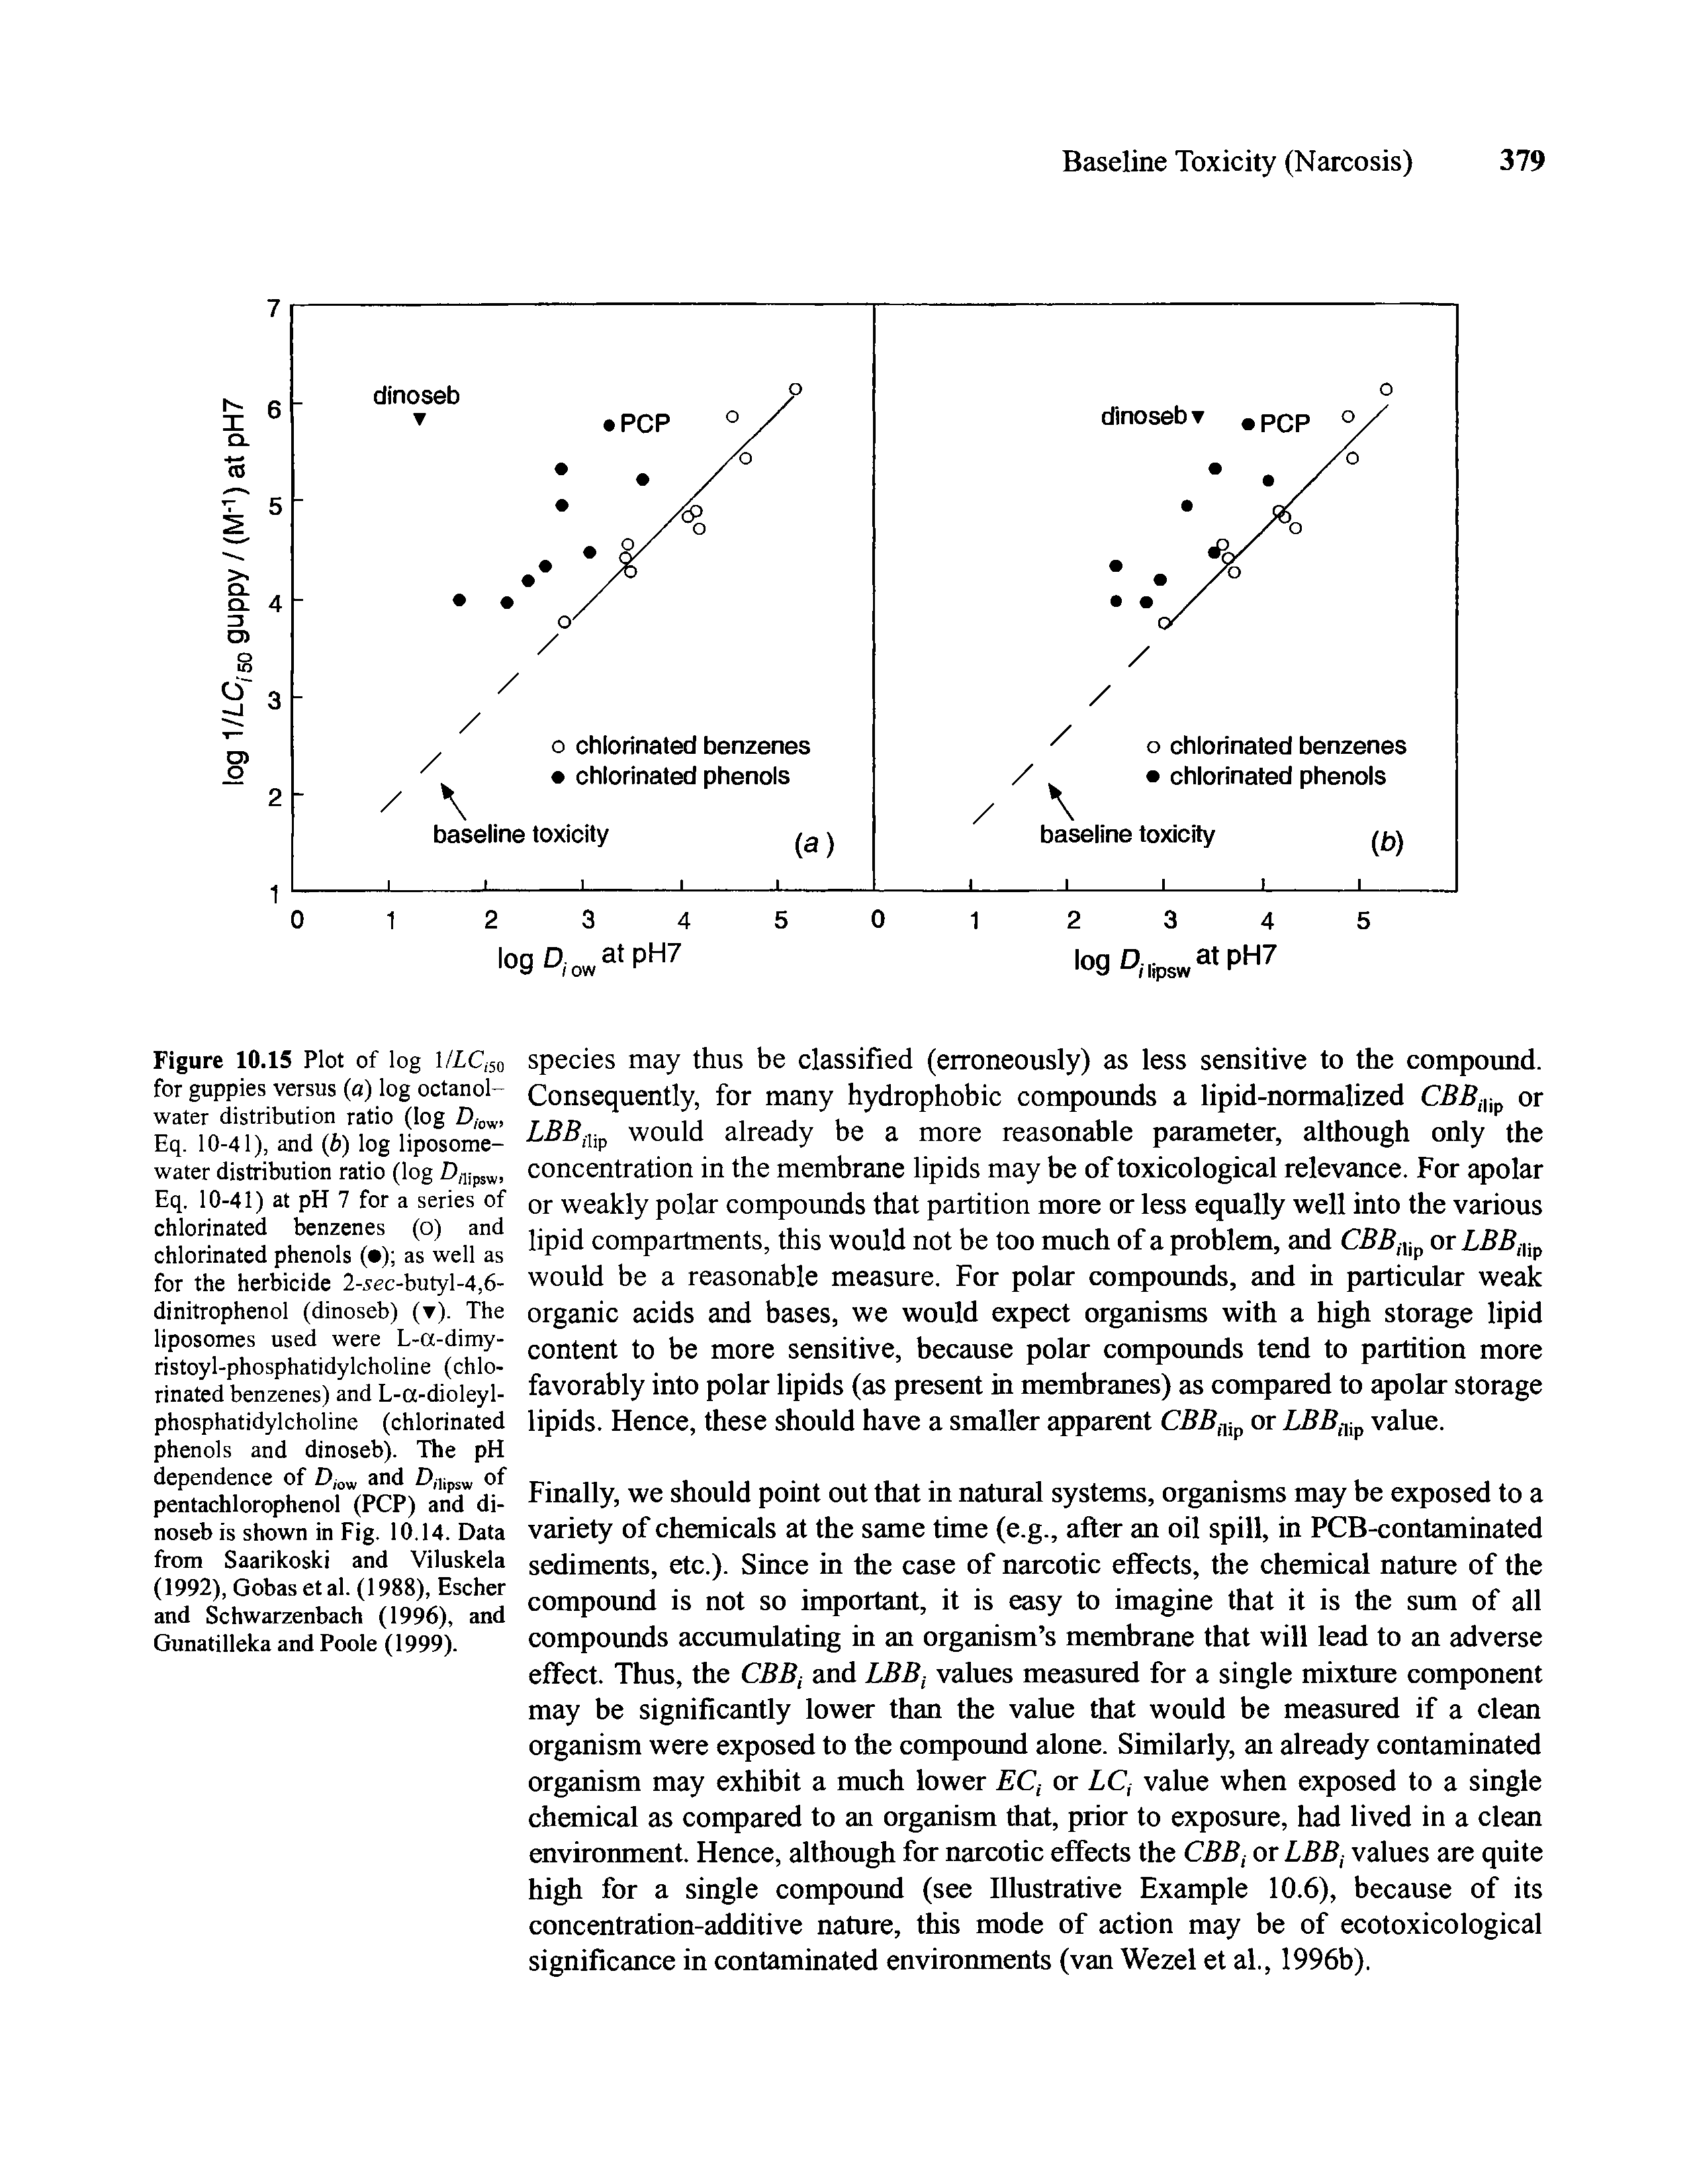 Figure 10.15 Plot of log 1 /LCi50 for guppies versus (a) log octanol-water distribution ratio (log Z),ow, Eq. 10-41), and (b) log liposome-water distribution ratio (log Z),lipsw, Eq. 10-41) at pH 7 for a series of chlorinated benzenes (o) and chlorinated phenols ( ) as well as for the herbicide 2-.9ec-butyl-4.6-dinitrophenol (dinoseb) (v). The liposomes used were L-a-dimy-ristoyl-phosphatidylcholine (chlorinated benzenes) and L-a-dioleyl-phosphatidylcholine (chlorinated phenols and dinoseb). The pH dependence of D/ow and D,lipsw of pentachlorophenol (PCP) and dinoseb is shown in Fig. 10.14. Data from Saarikoski and Viluskela (1992), Gobas et al. (1988), Escher and Schwarzenbach (1996), and Gunatilleka and Poole (1999).